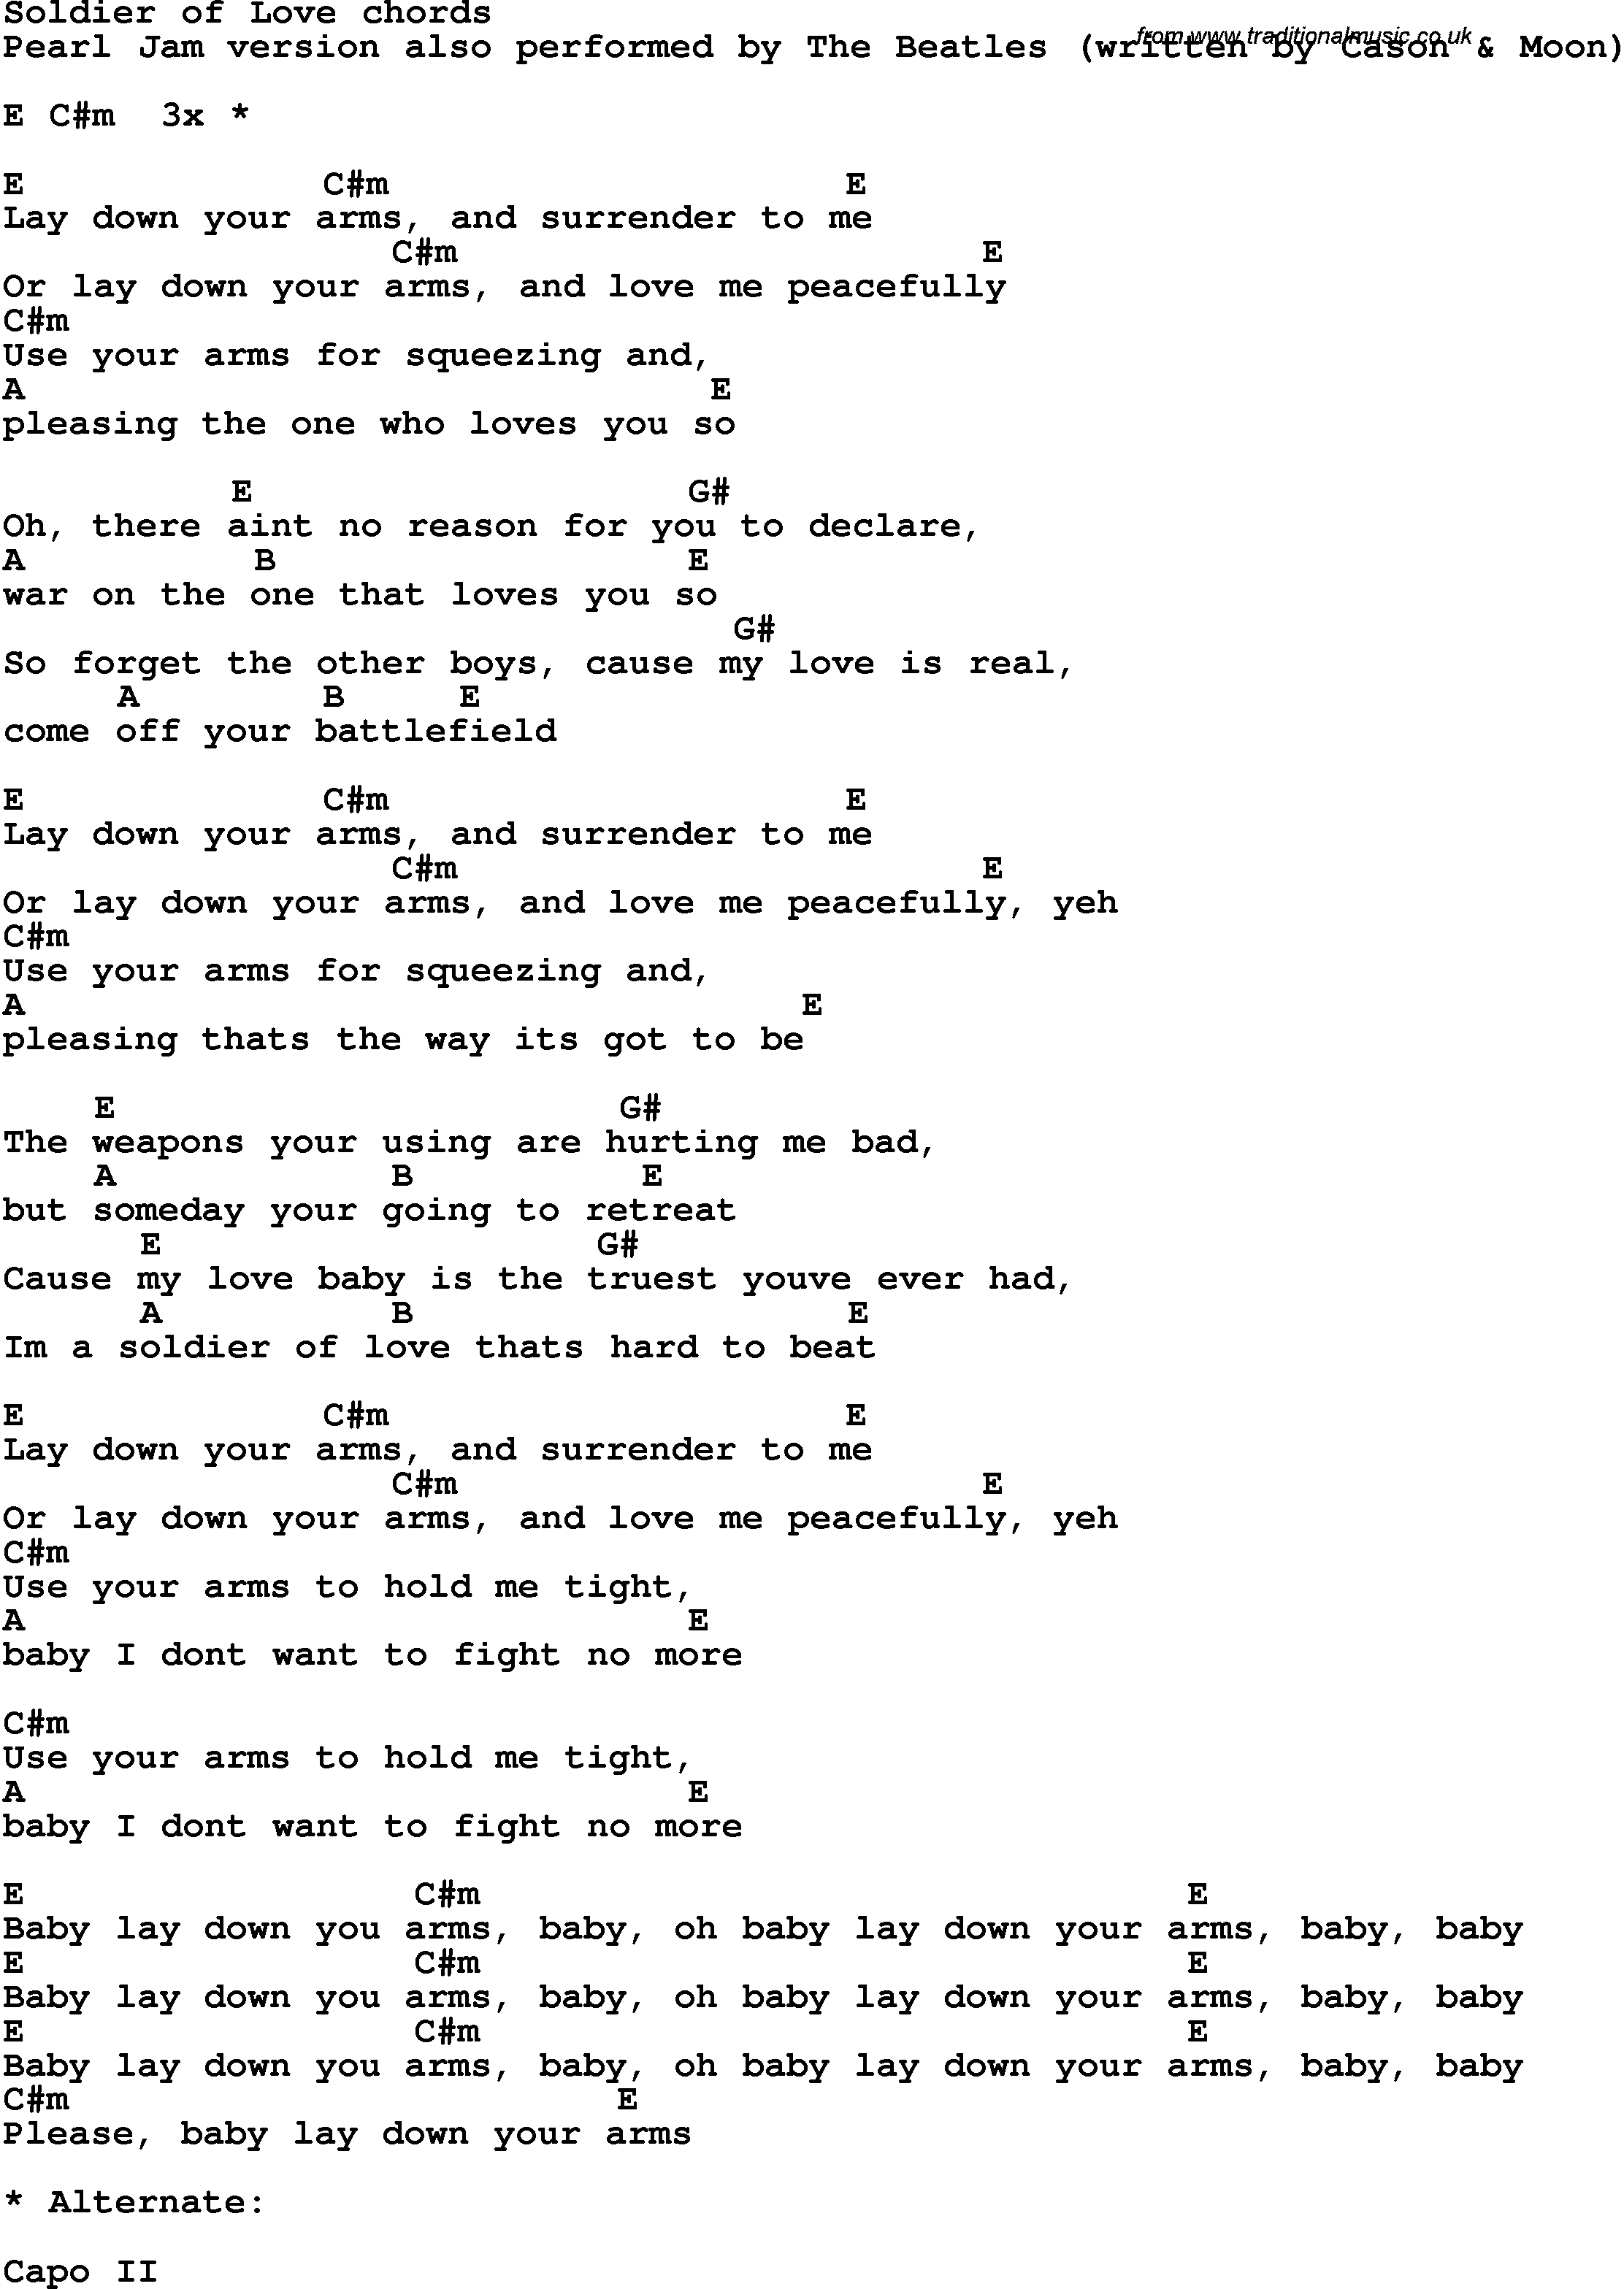 Song Lyrics with guitar chords for Soldier of Love